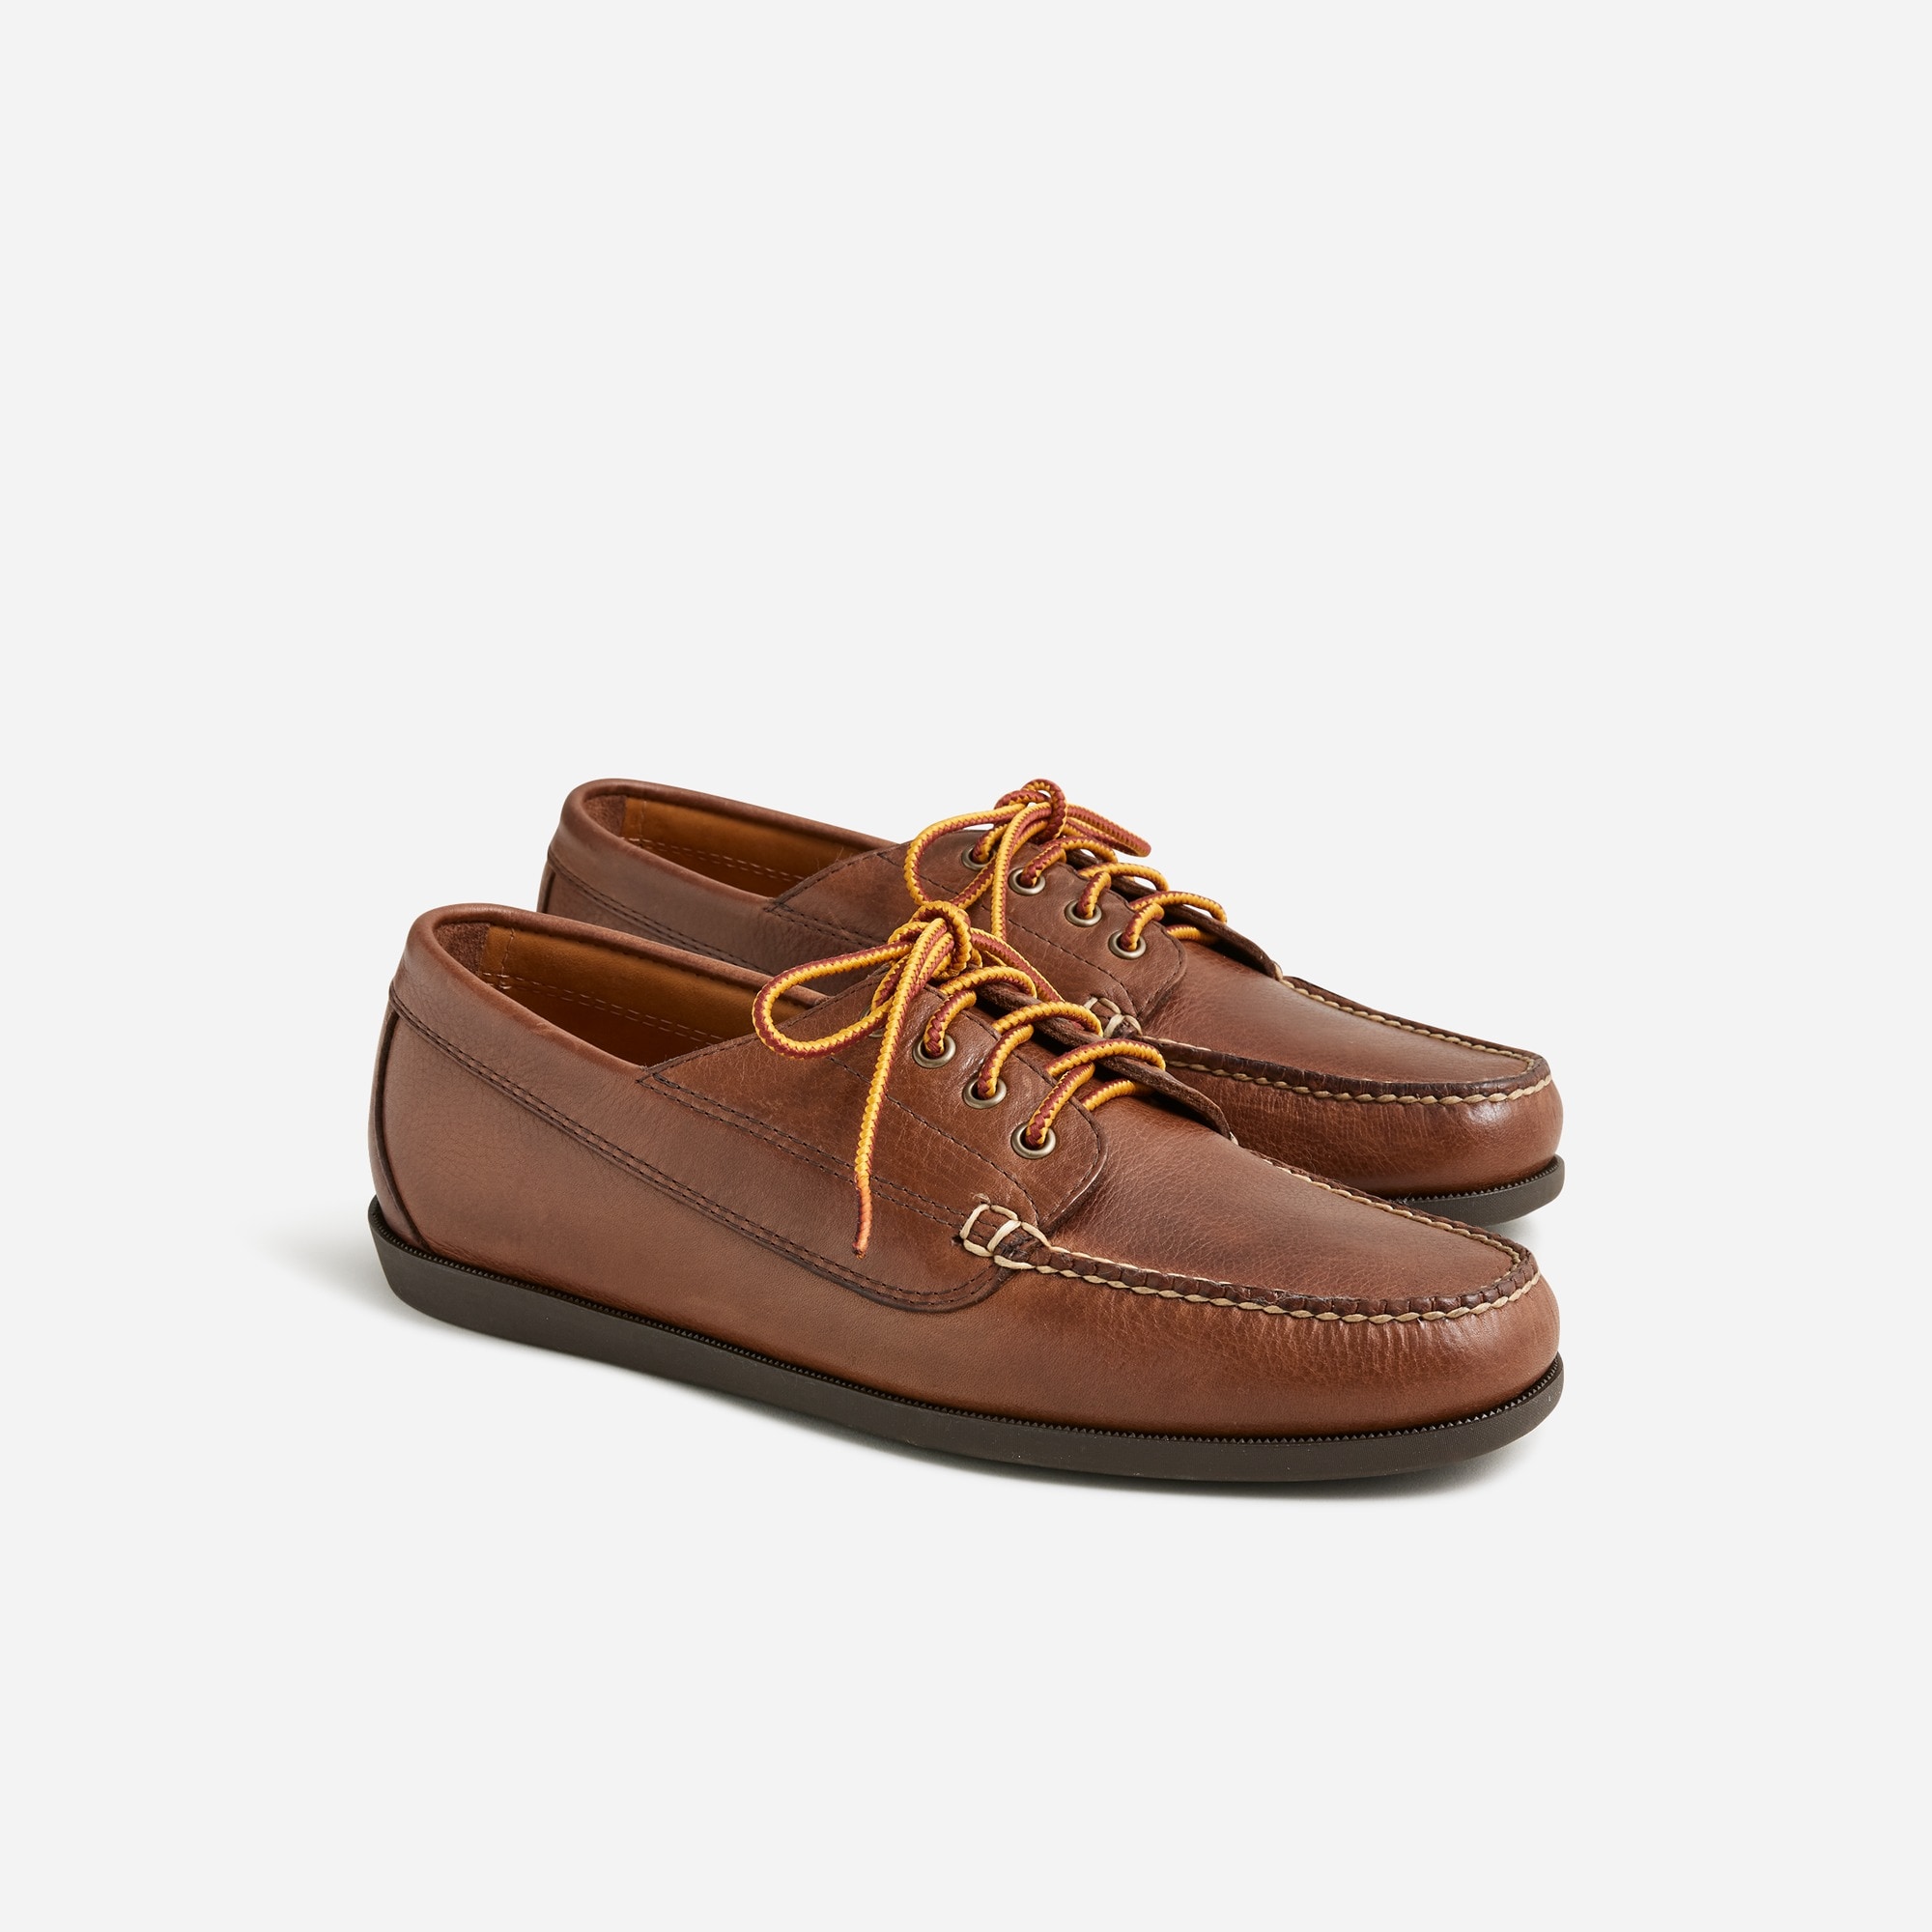 Jcrew Camp shoes in leather